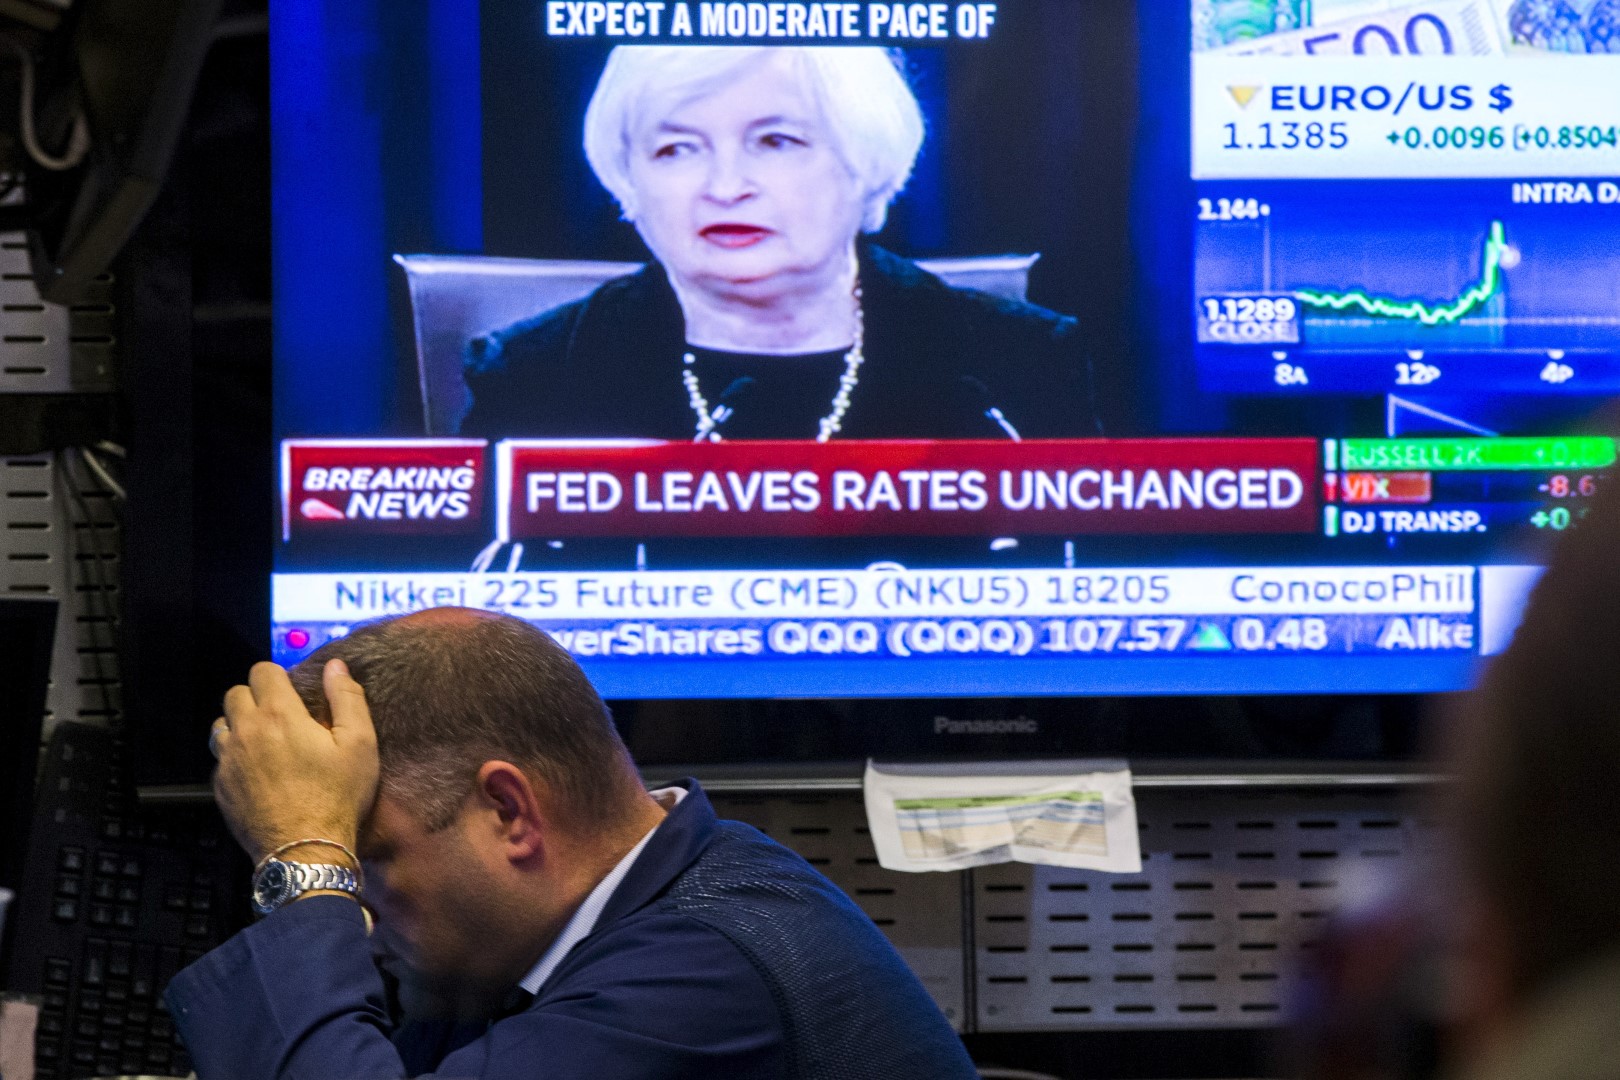 A trader works underneath a television screen showing Federal Reserve Chair Janet Yellen announcing that the Federal Reserve will leave interest rates unchanged on the floor of the New York Stock Exchange in New York September 17, 2015. REUTERS/Lucas Jackson - RTS1MCU